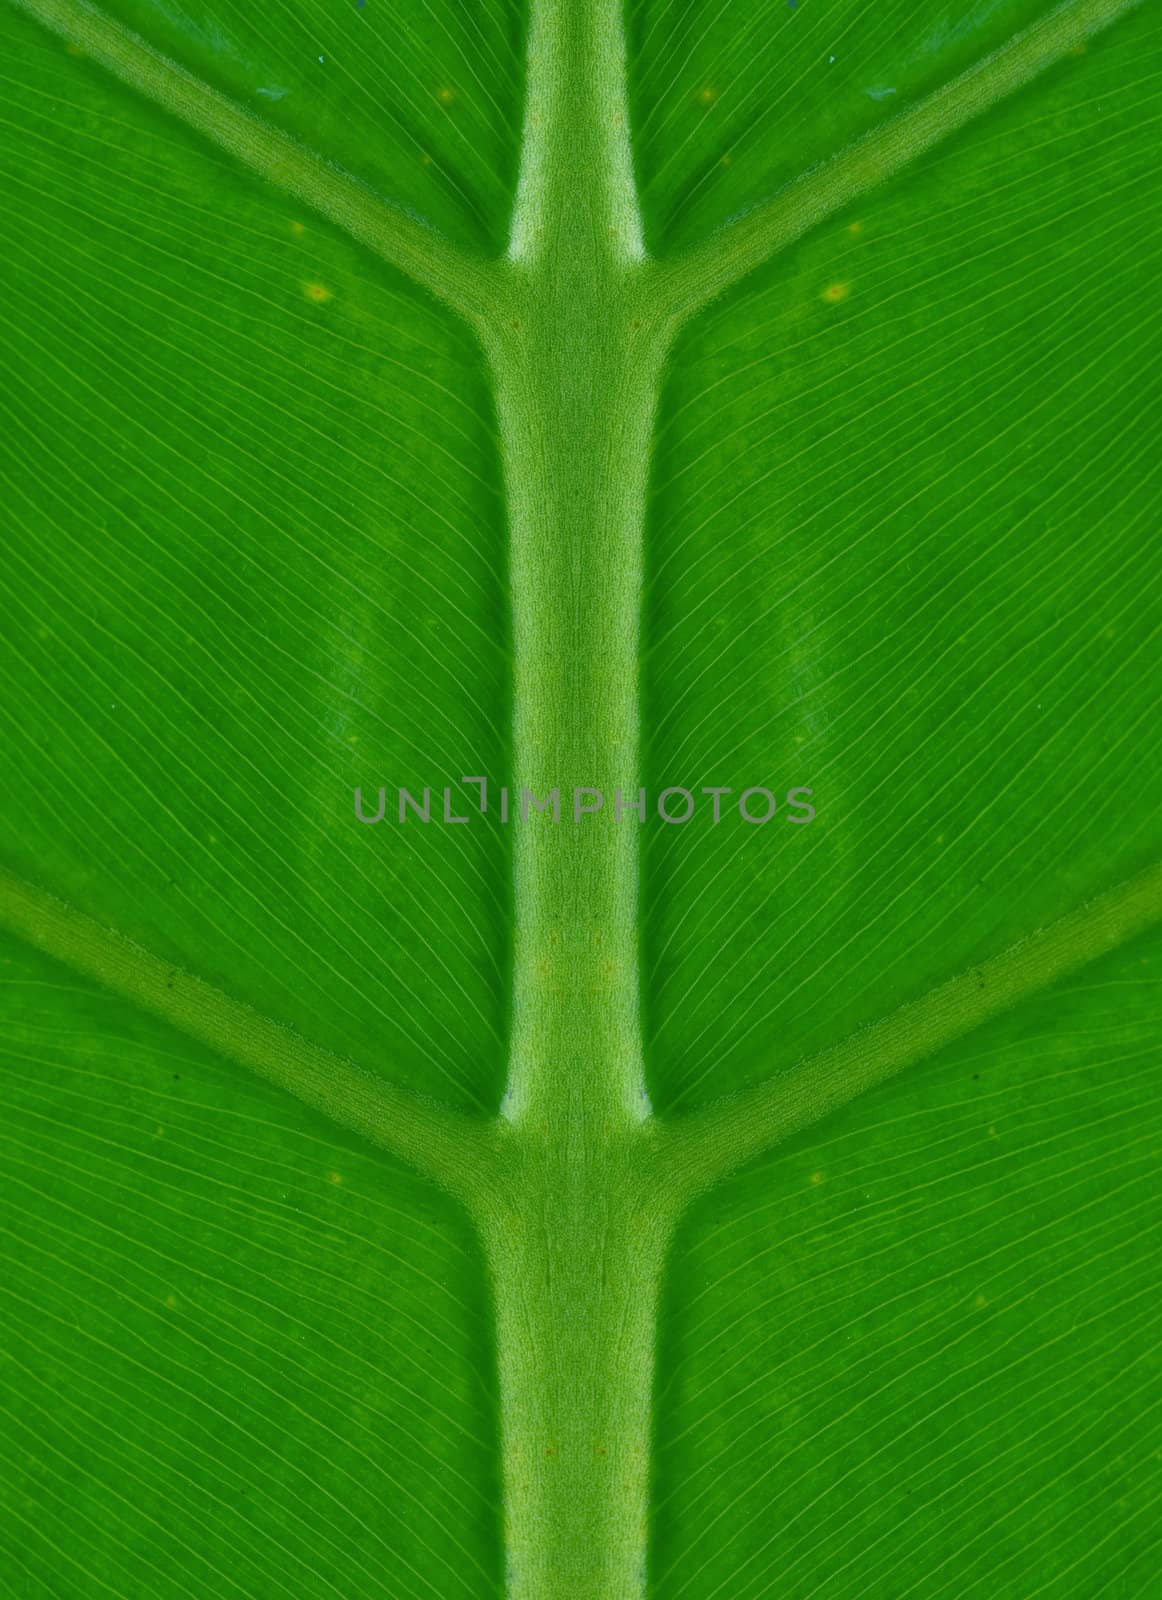 perfectly symmetrical green palm leaf nature background